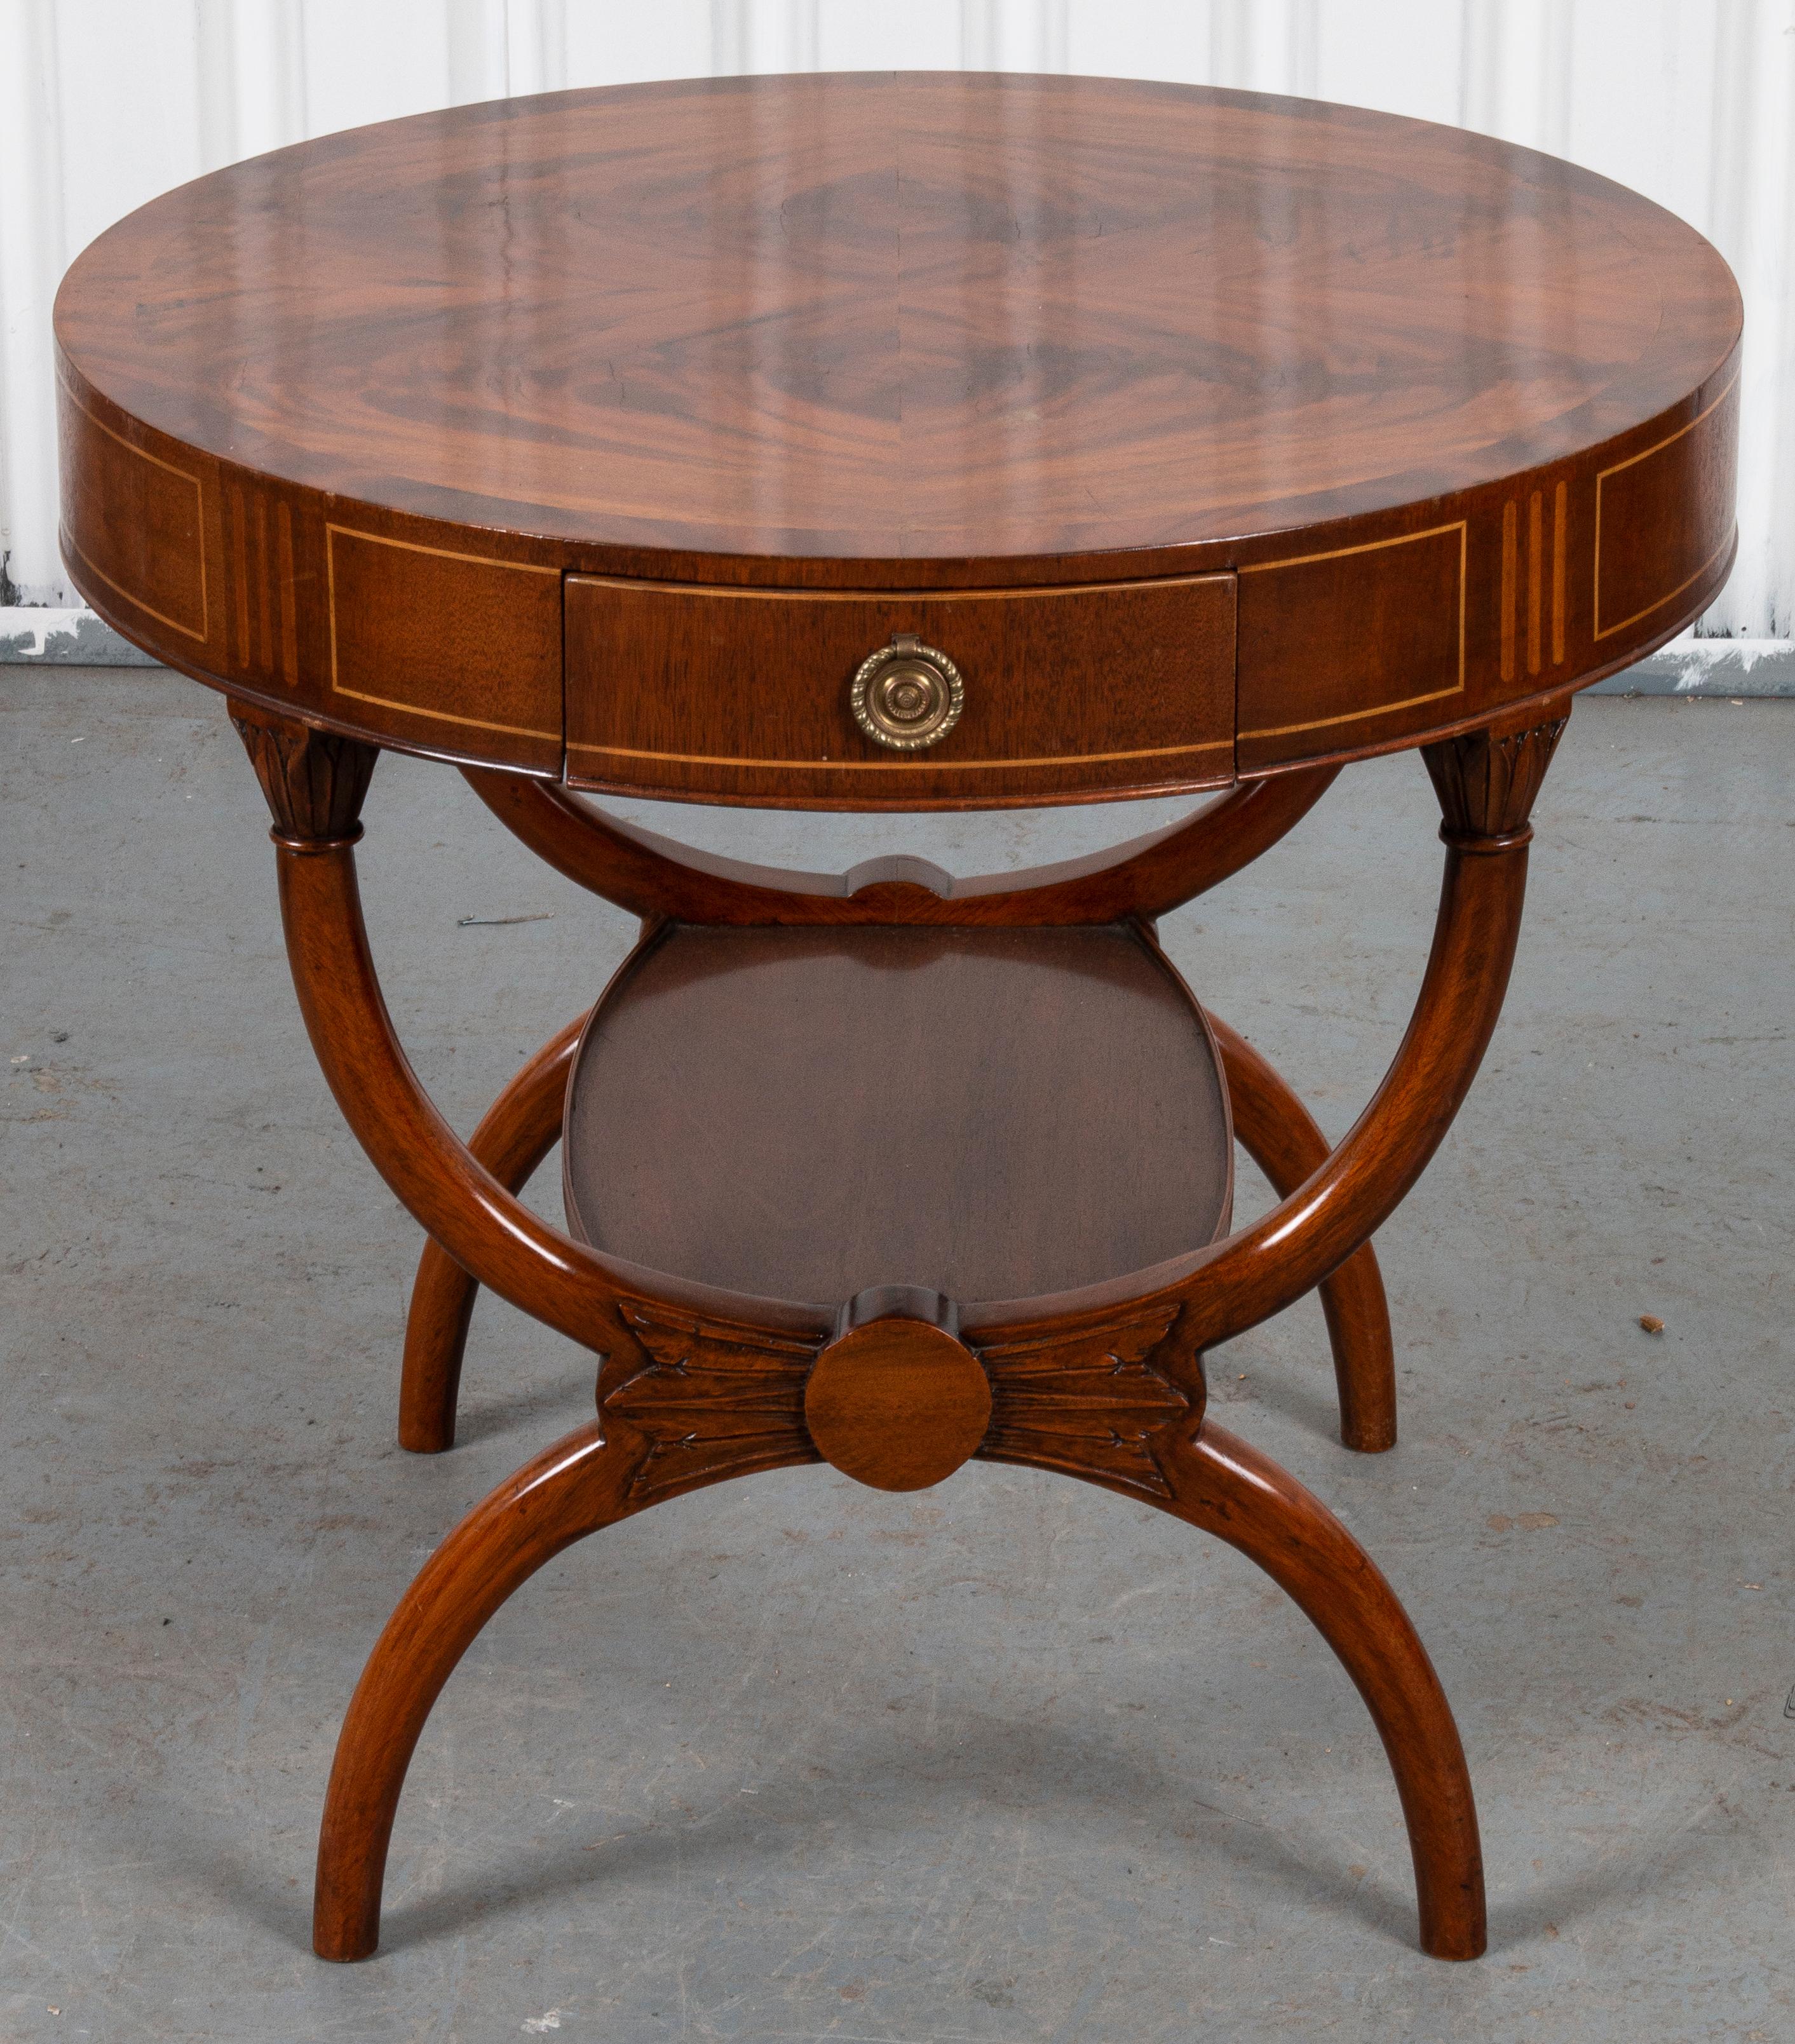 Regency round occasional table, the round top with inlaid details and a carved Curule form tiered base. 

Dimensions: 26” H x 27.5” D.